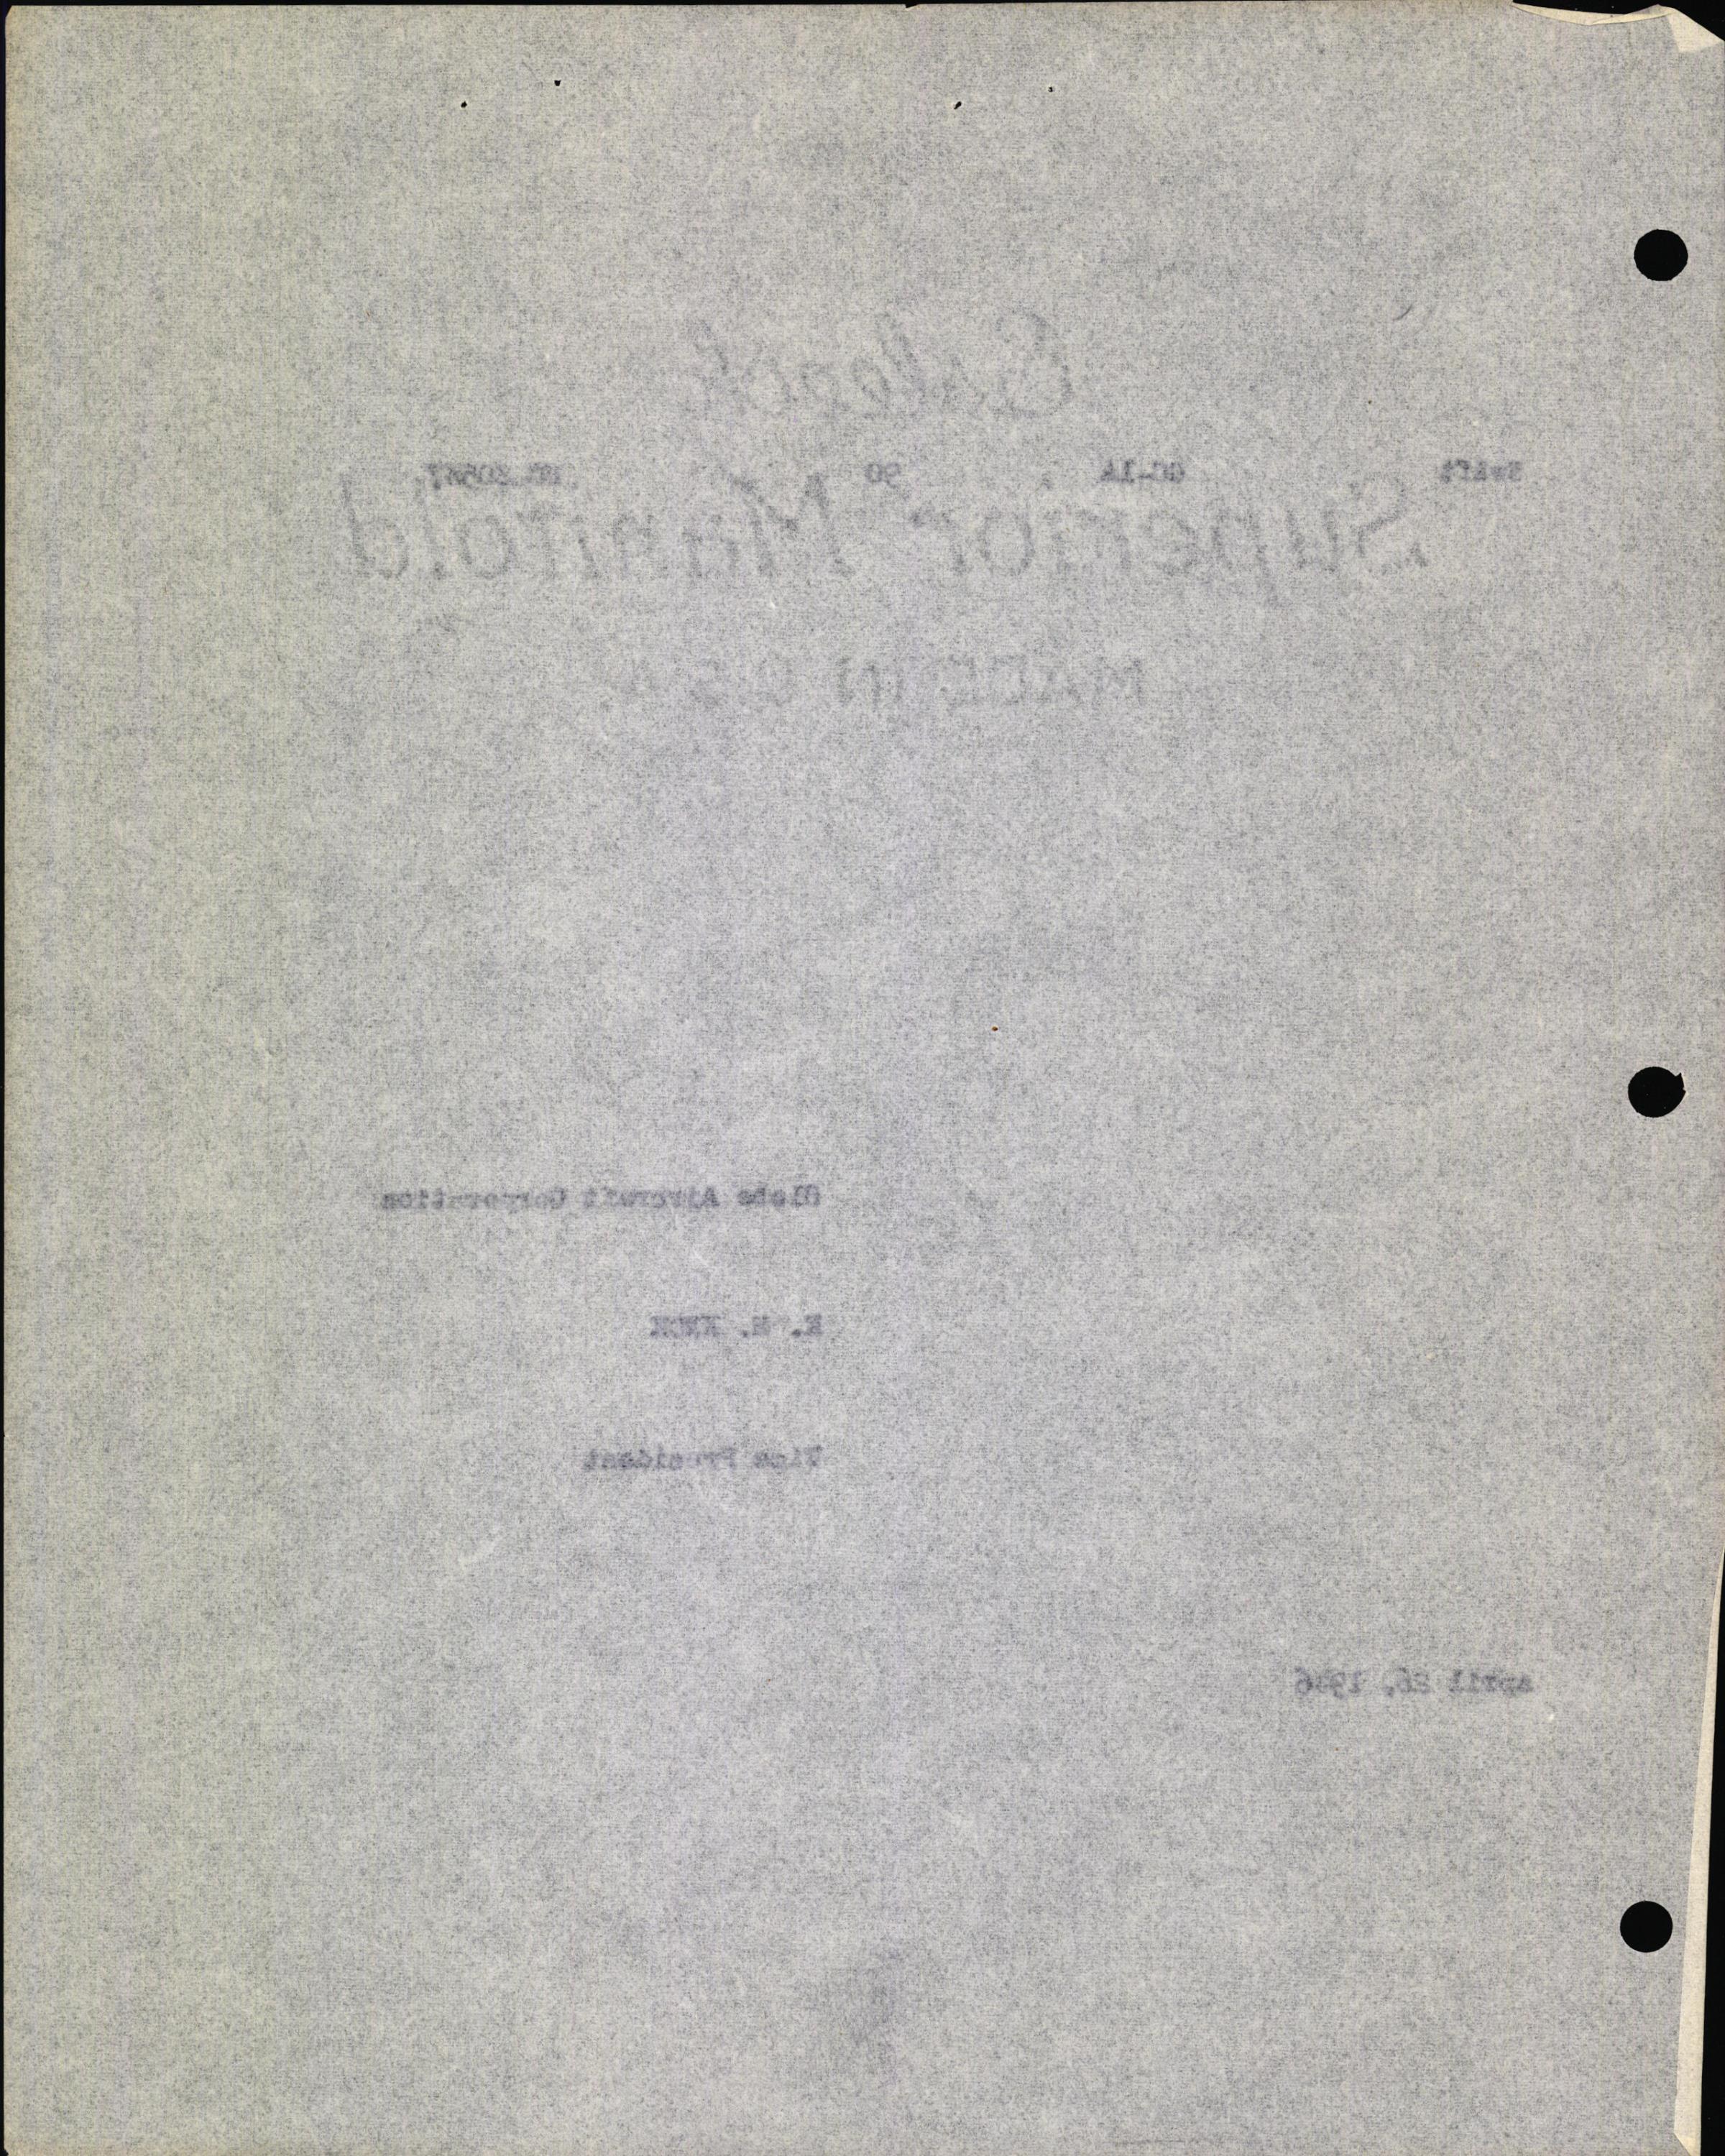 Sample page 12 from AirCorps Library document: Technical Information for Serial Number 90